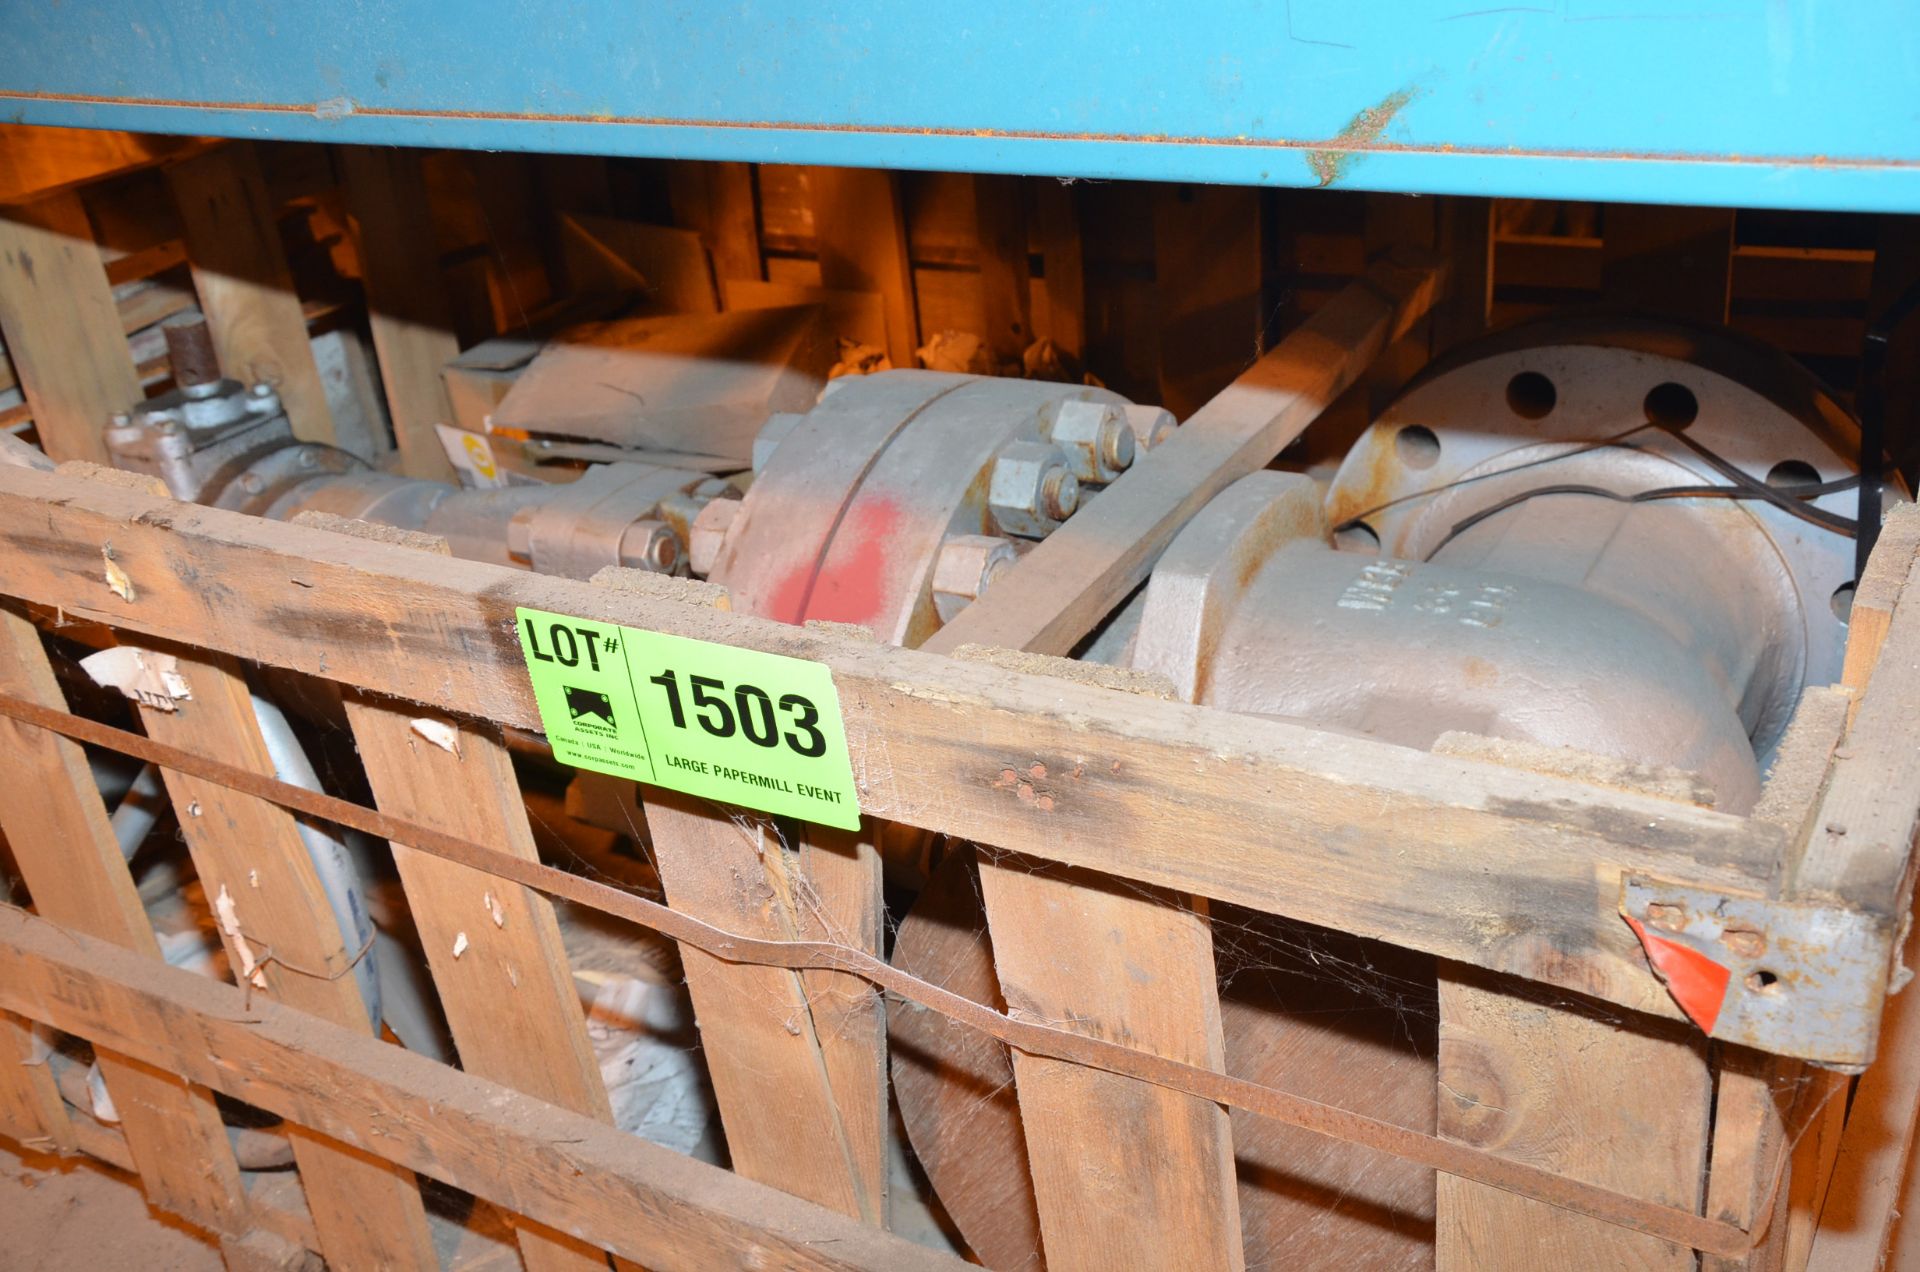 NEWCO 14 150 CONVENTIONAL VALVE (NEW IN CRATE), S/N N/A [RIGGING FEES FOR LOT #1503 - $60 USD PLUS - Image 2 of 2